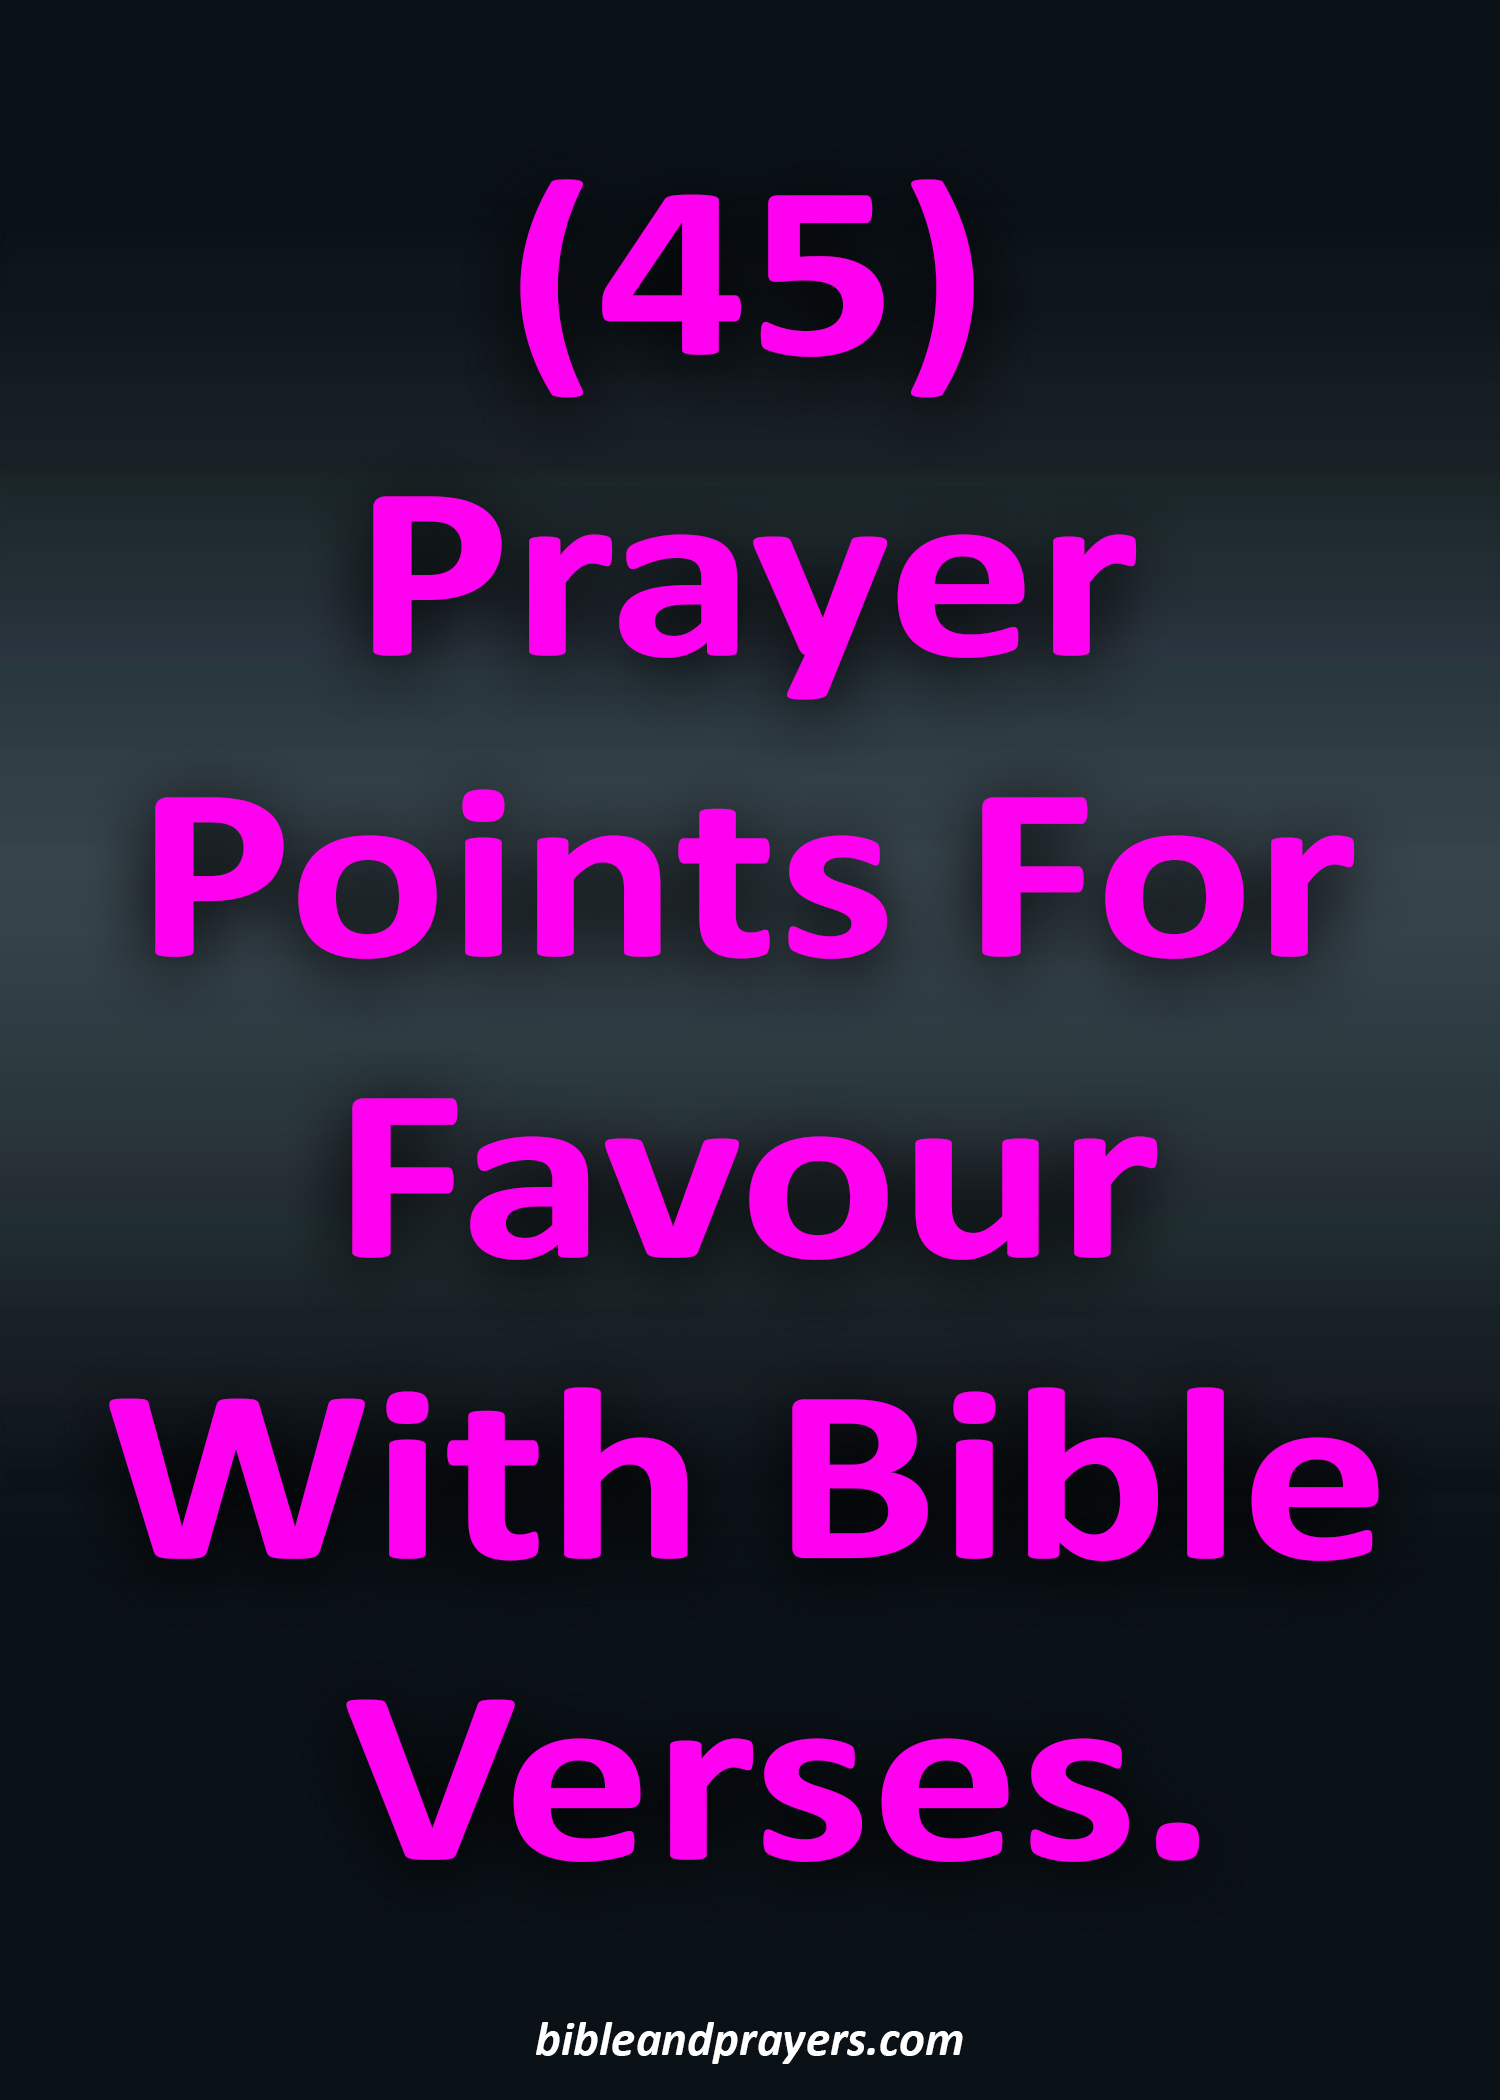 45 Prayer Points For Favour With Bible Verses.